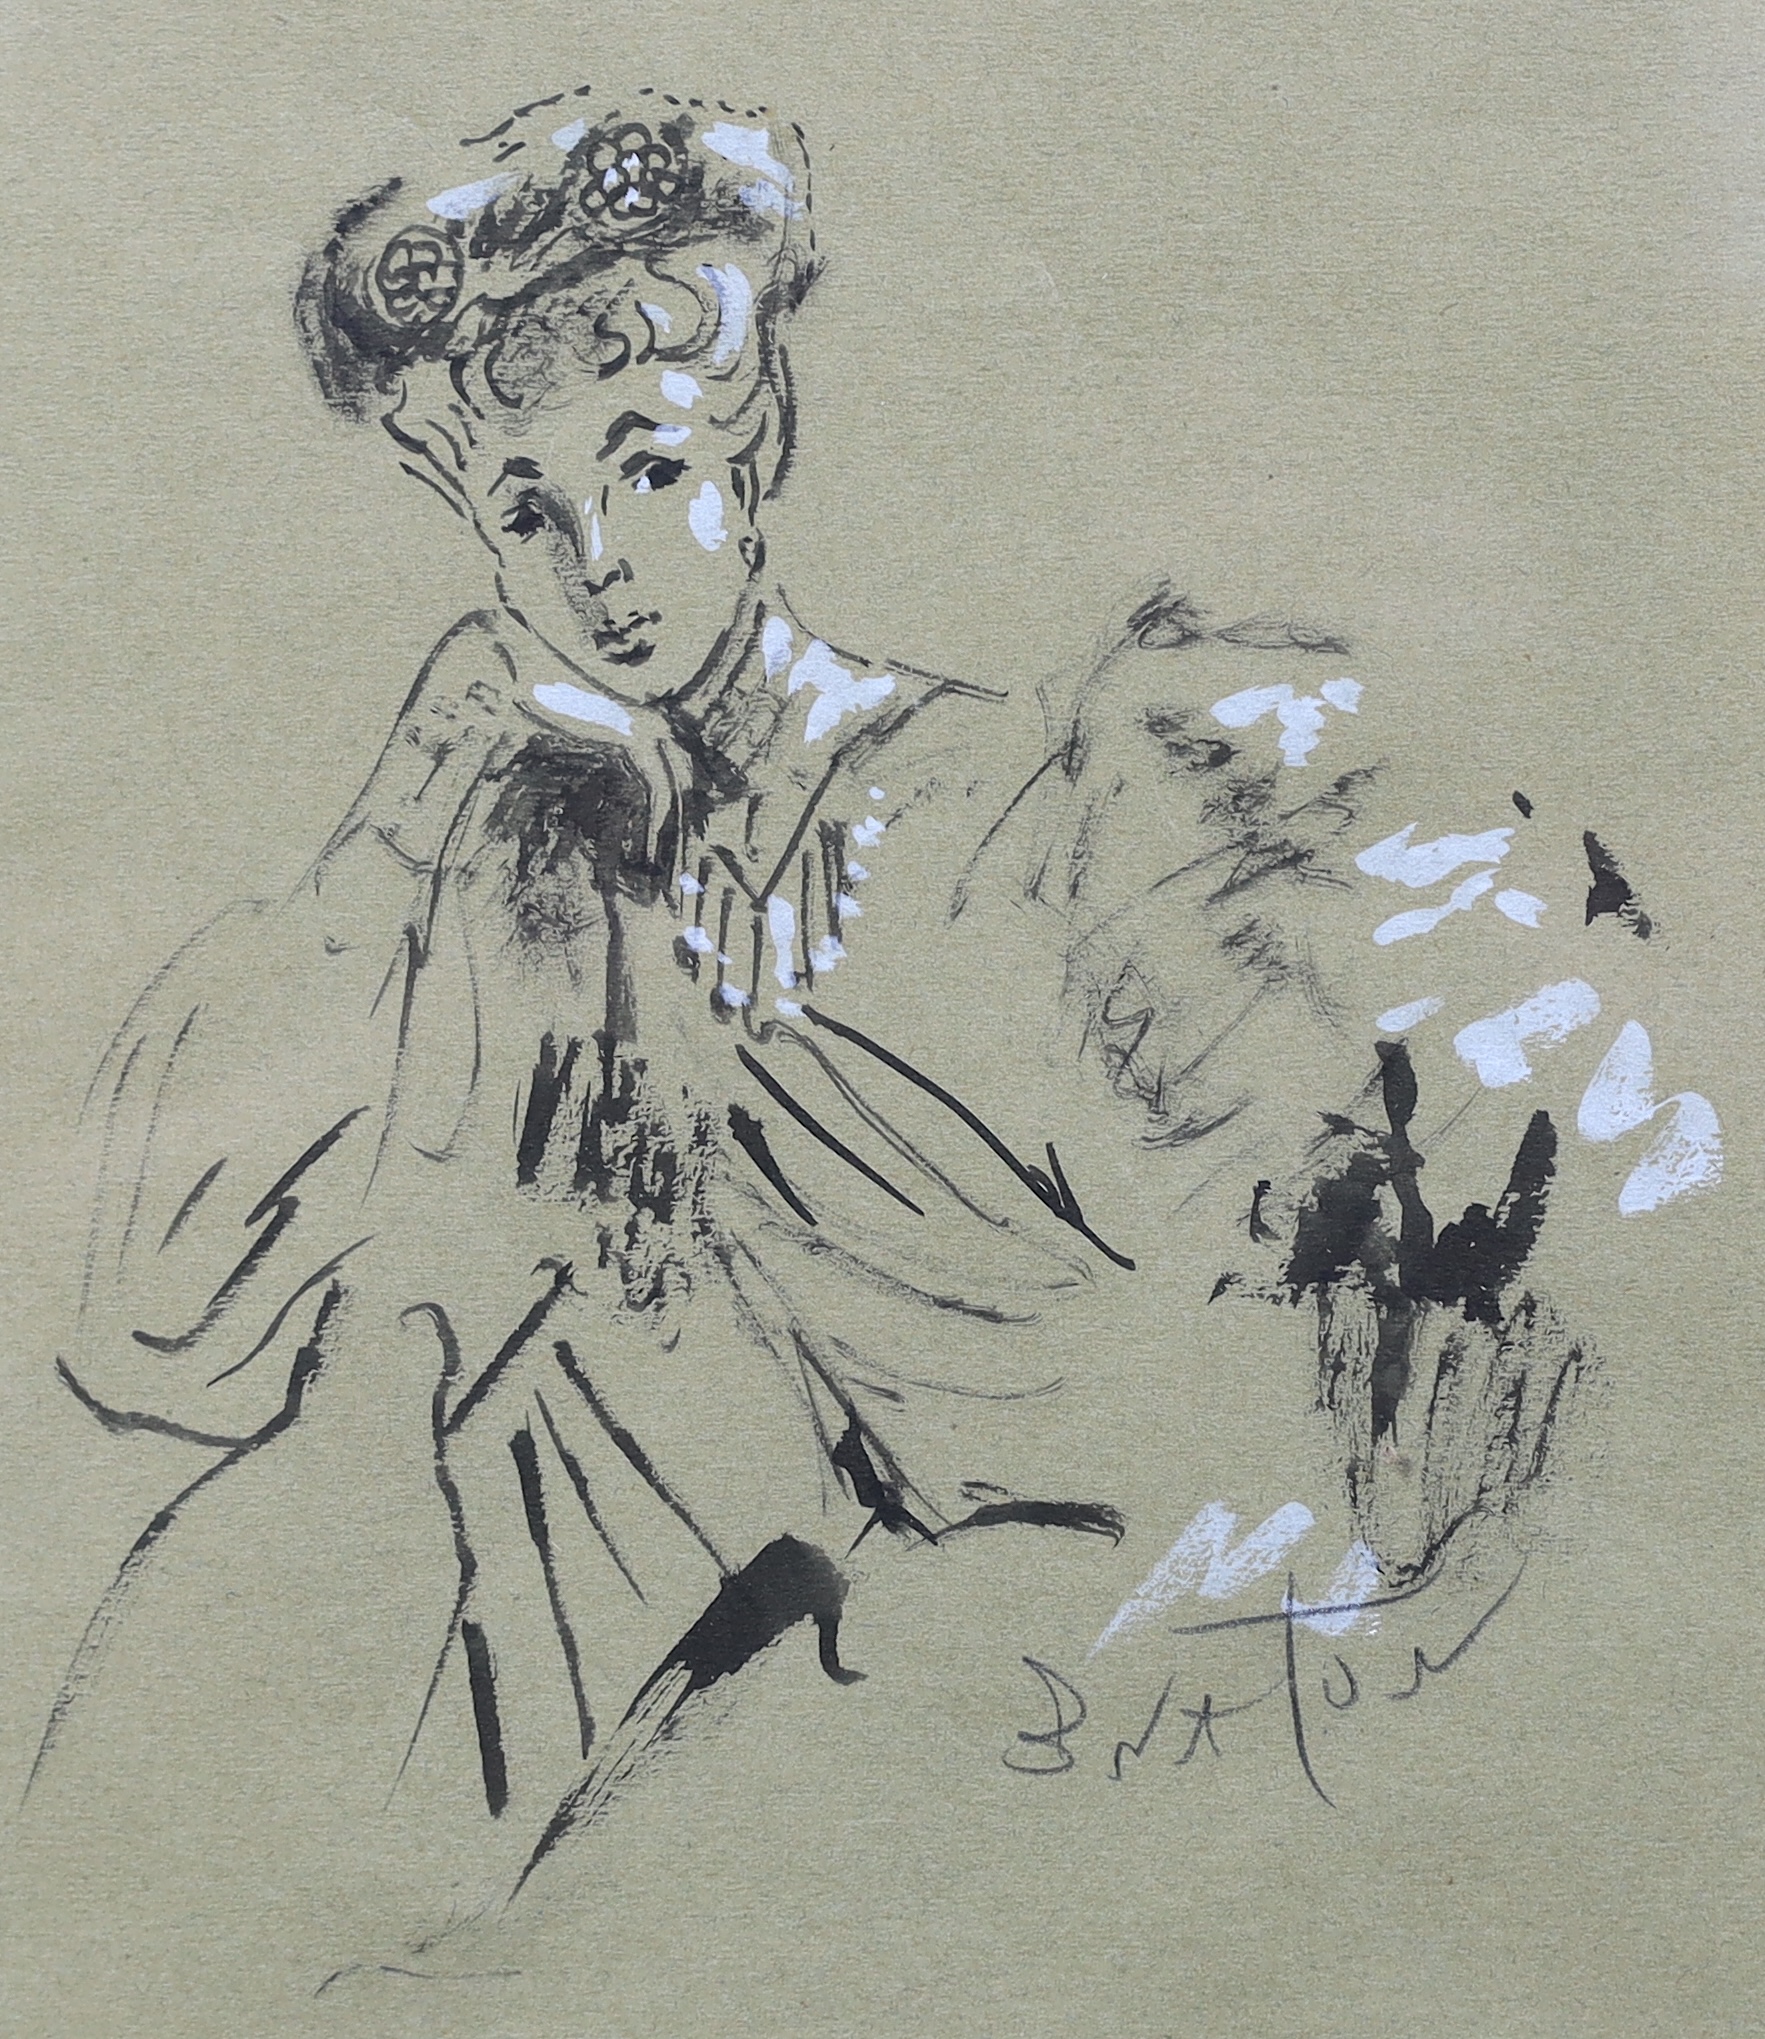 Sir Cecil Beaton (English, 1904-1980), 'Hat sketch', ink and bodycolour on paper, 20 x 17cm